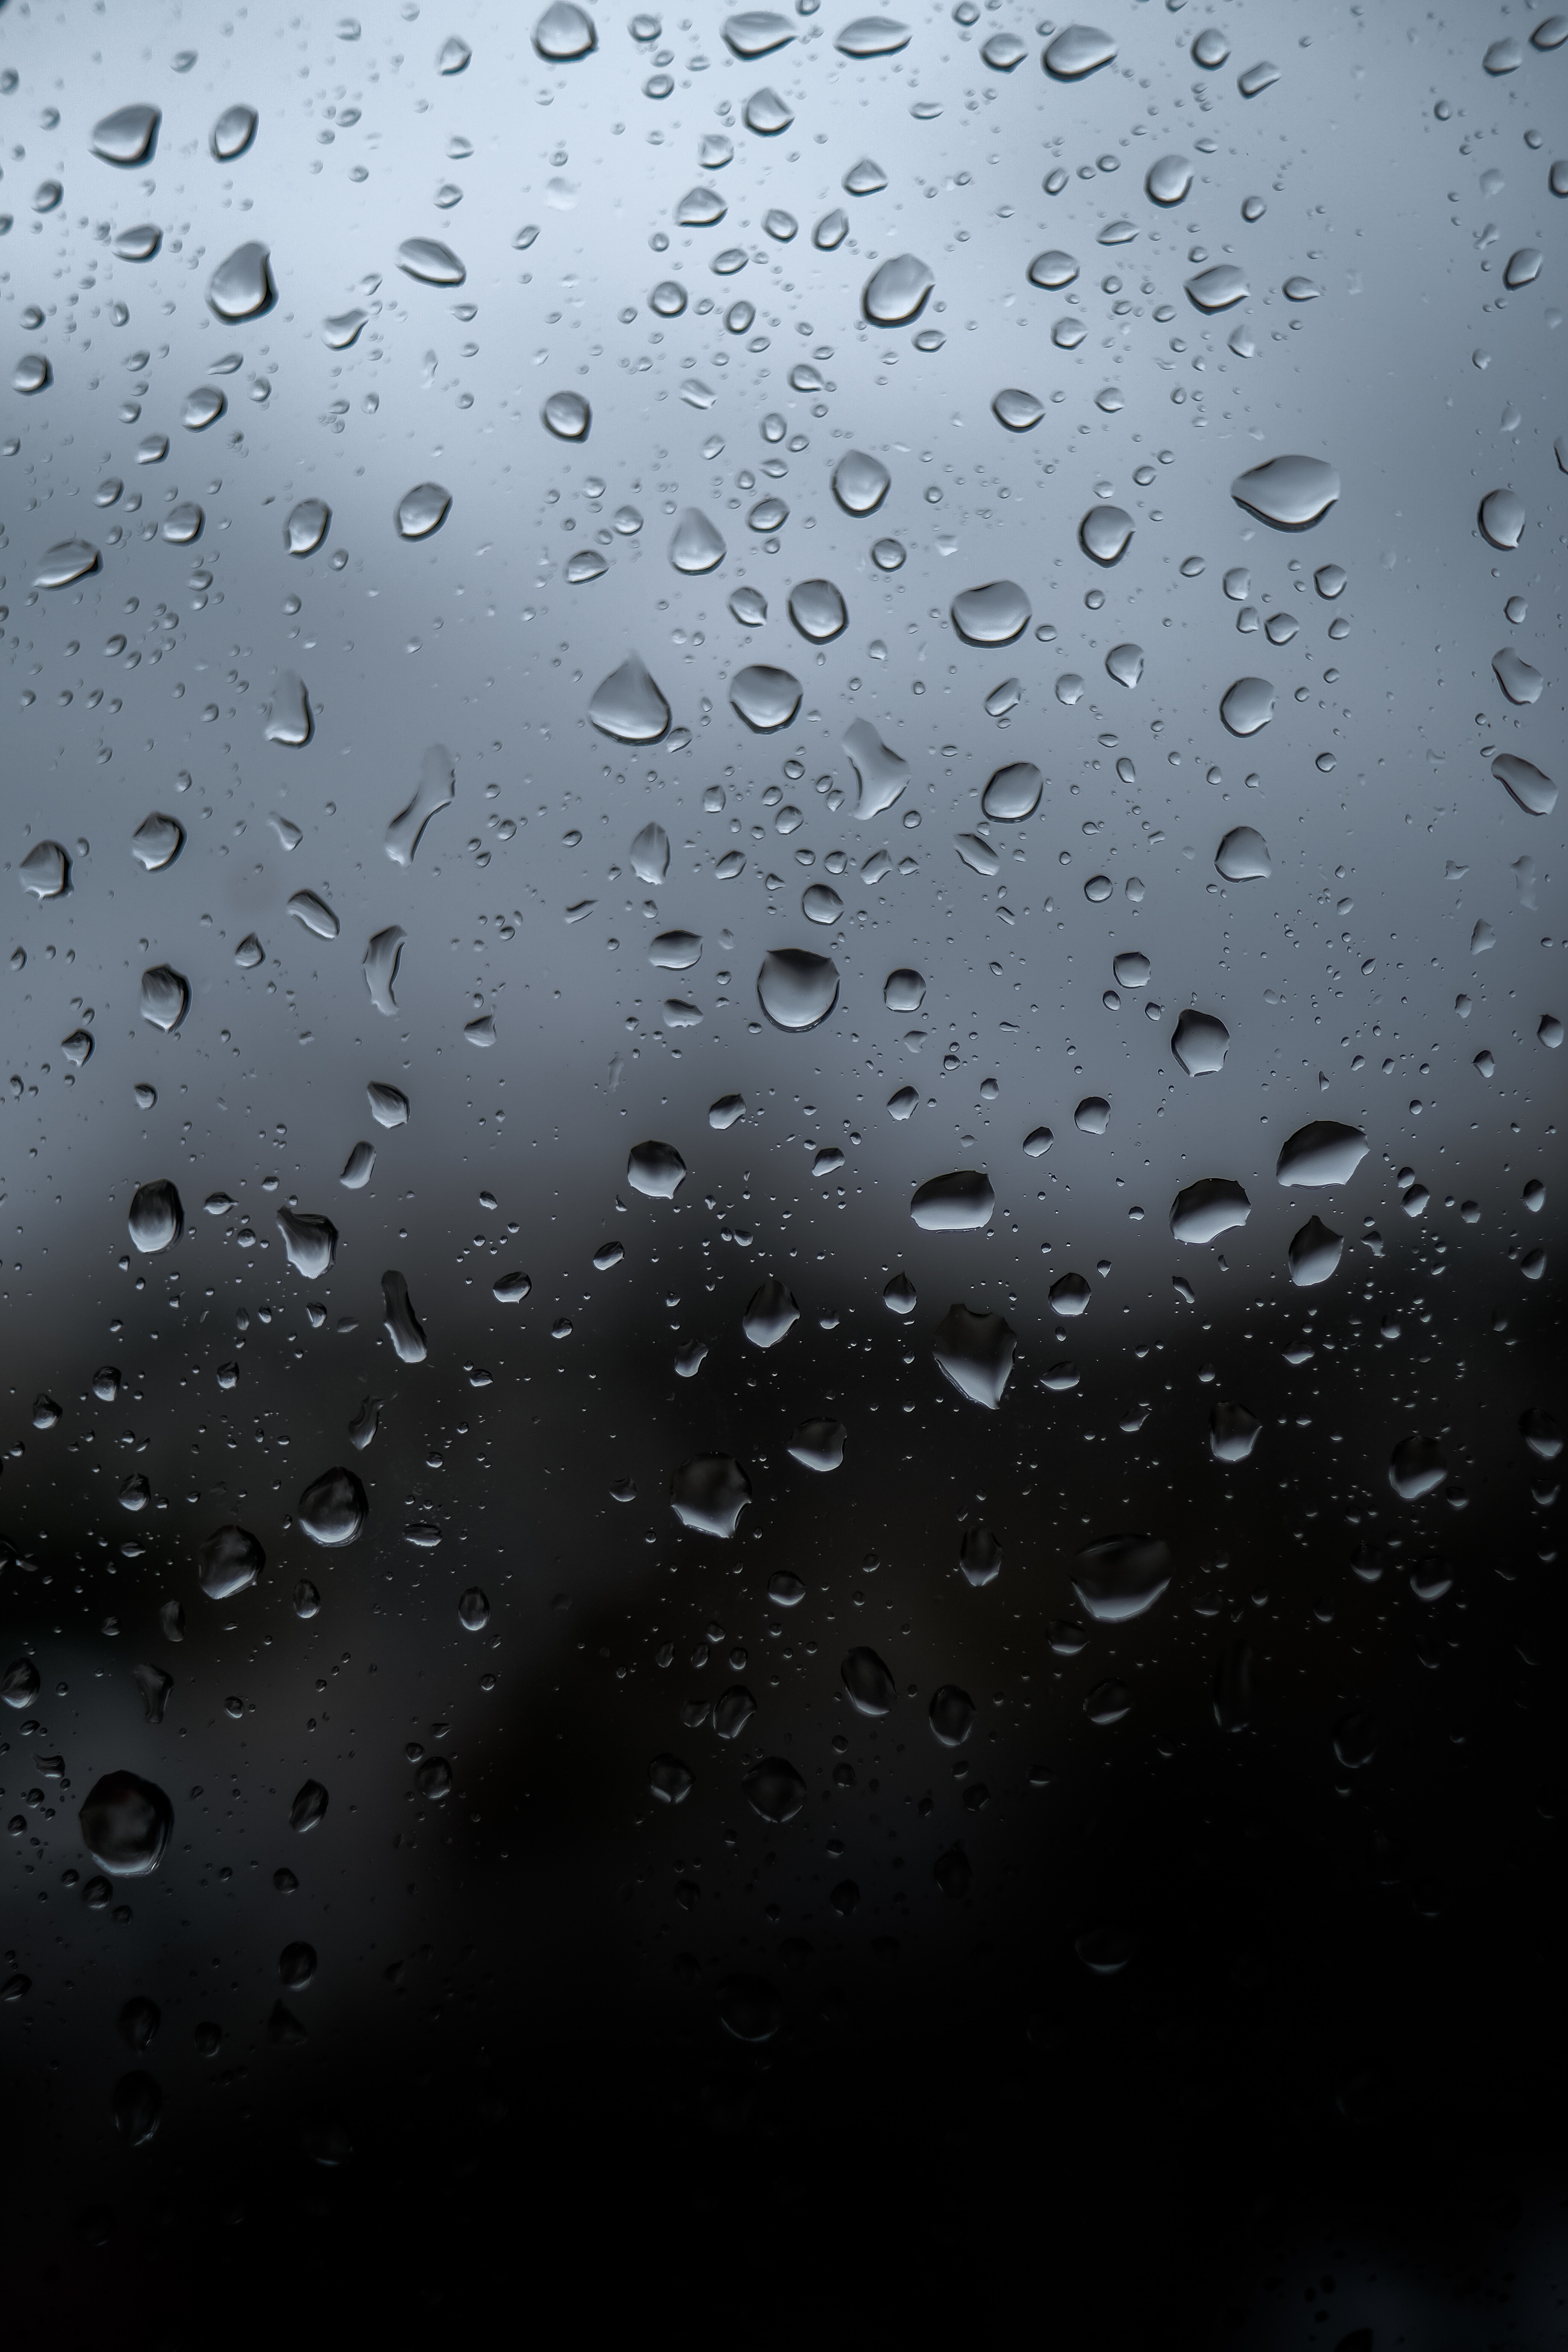 surface, drops, macro, wet, grey, glass wallpaper for mobile